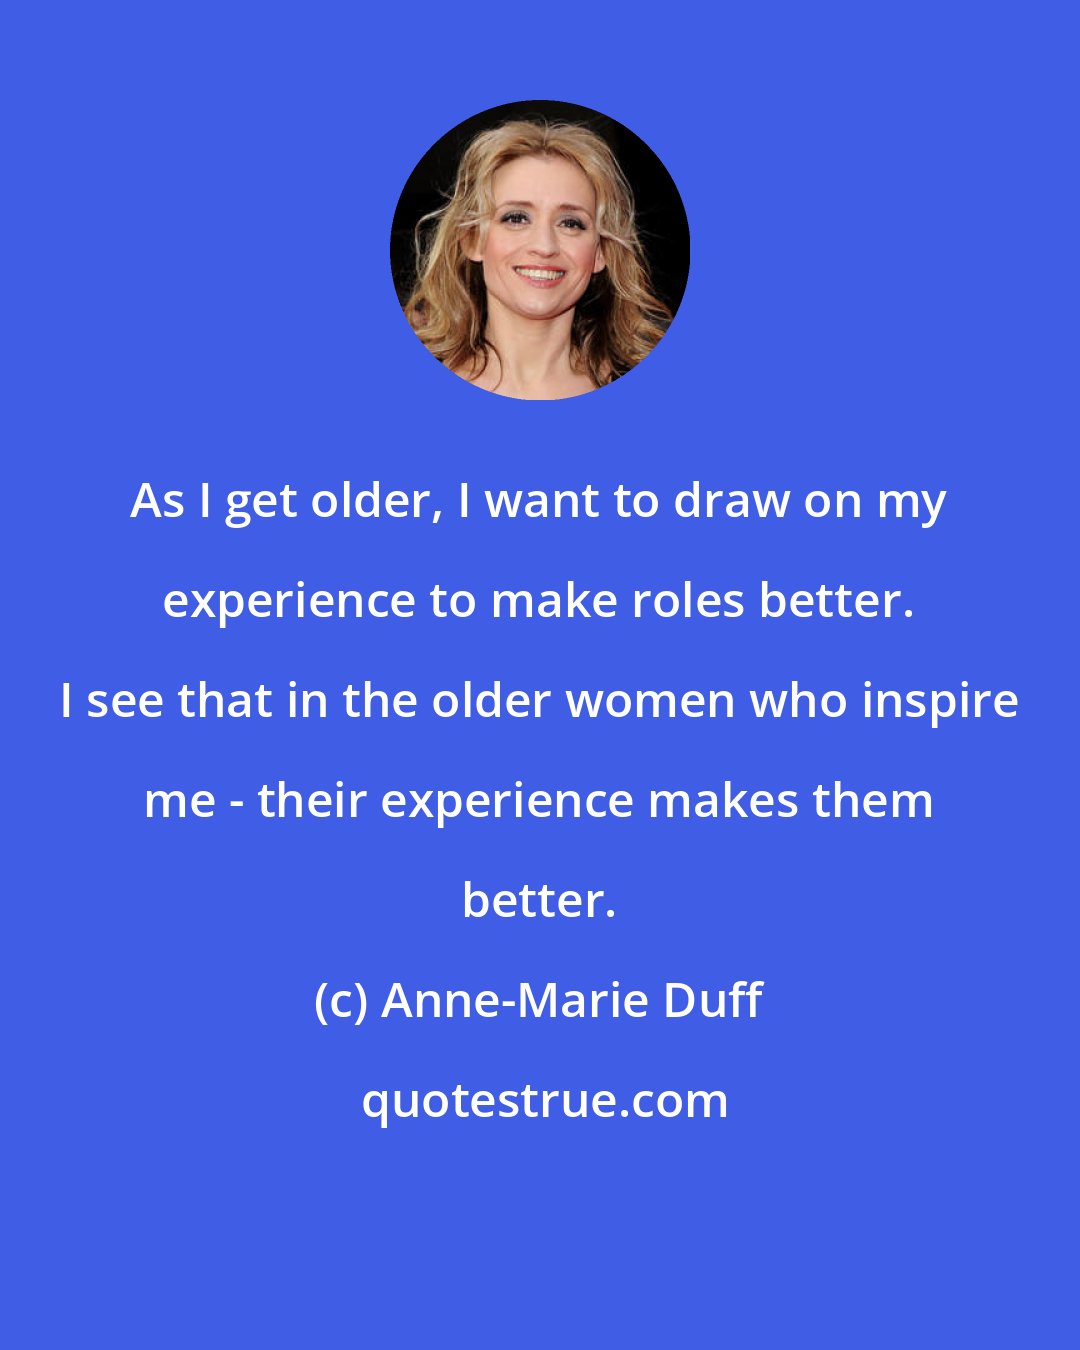 Anne-Marie Duff: As I get older, I want to draw on my experience to make roles better. I see that in the older women who inspire me - their experience makes them better.